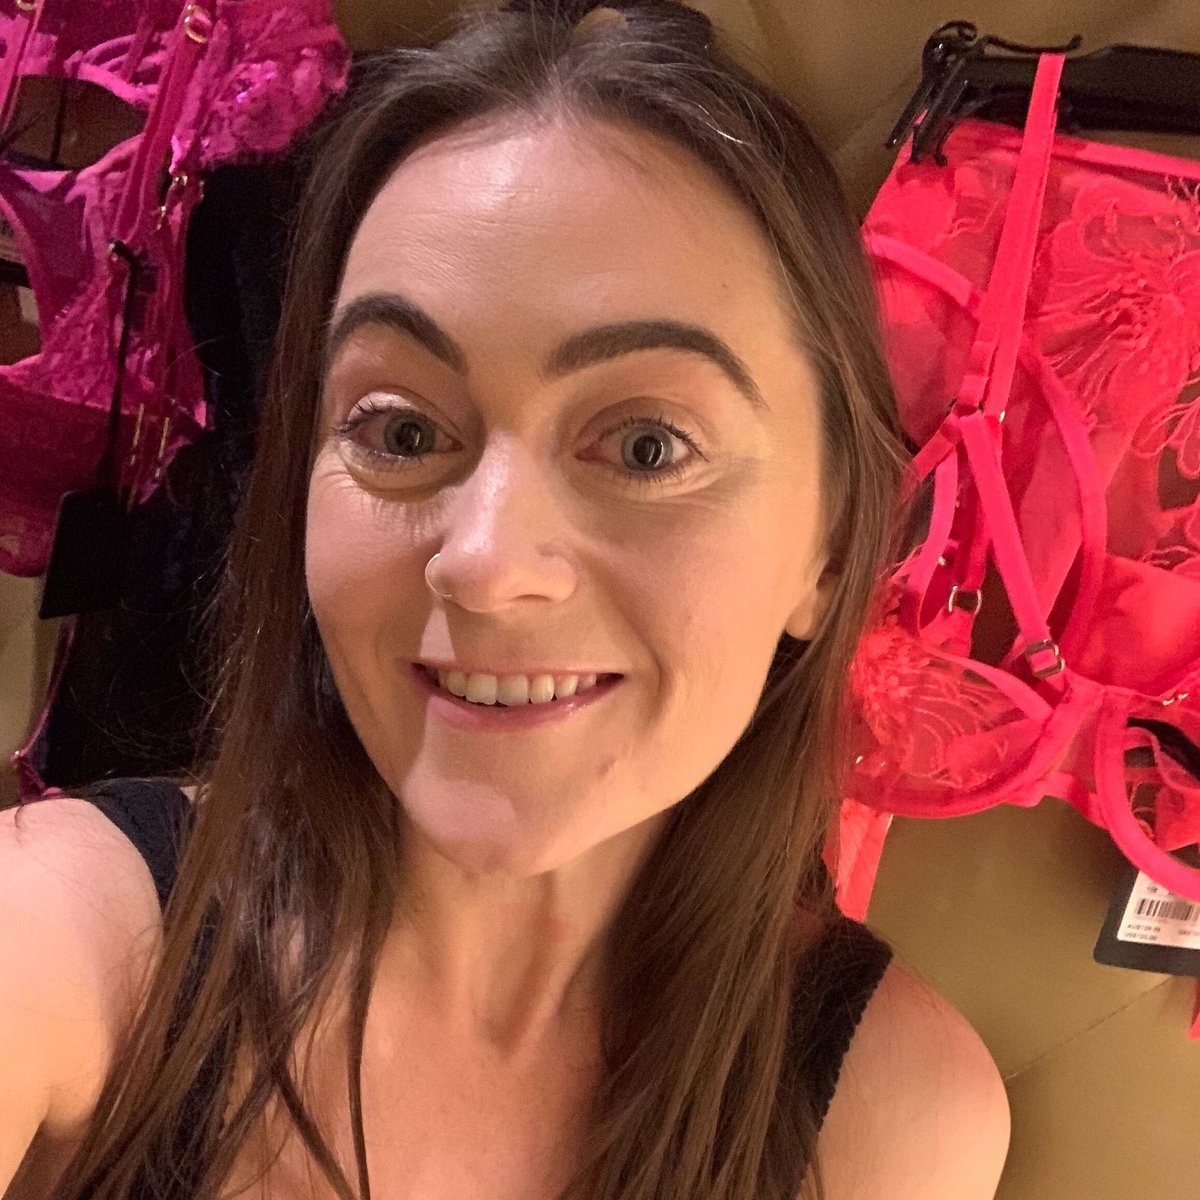 "I had a personalised Honey Birdette lingerie appointment"